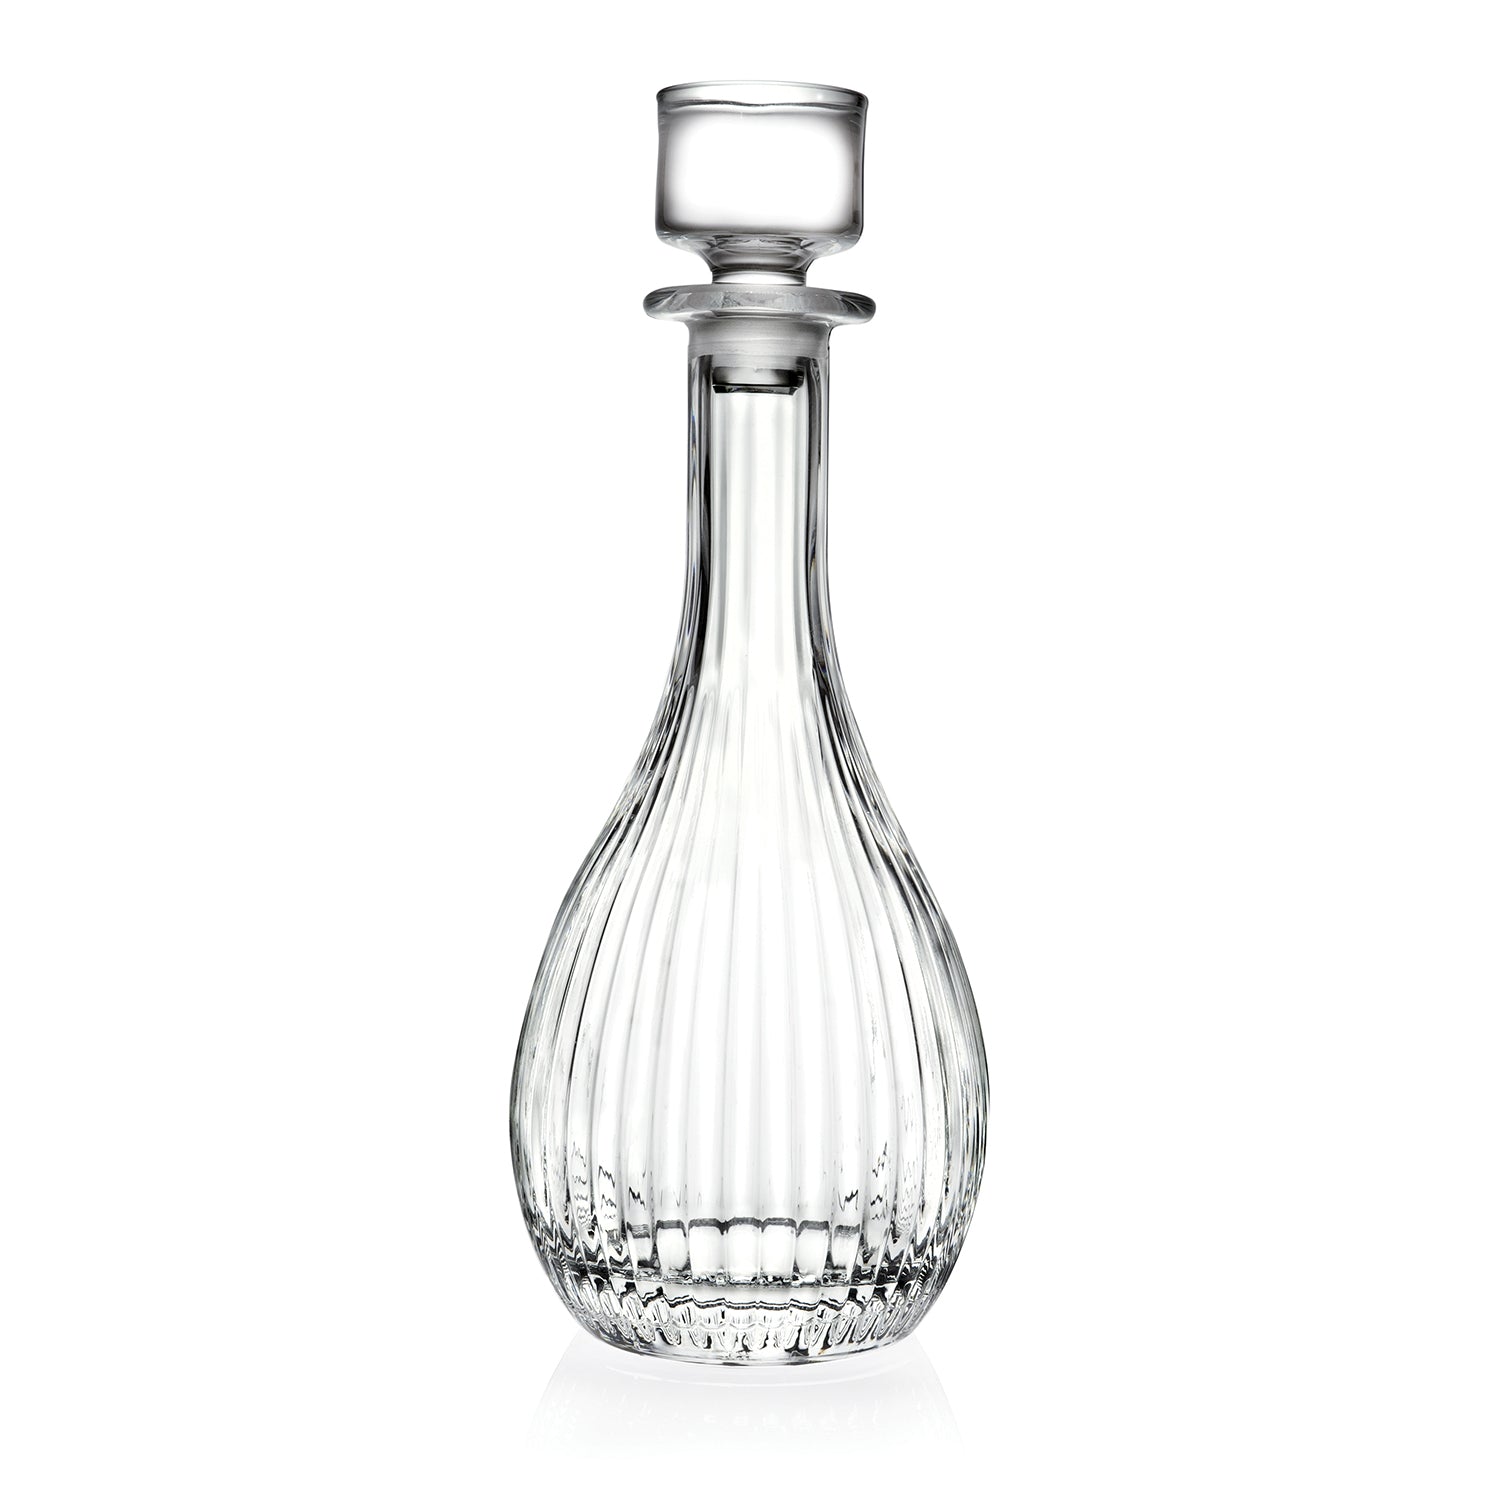 RCR(Made In Italy) Timeless Crystal Wine Decanter with Stopper 900 ML